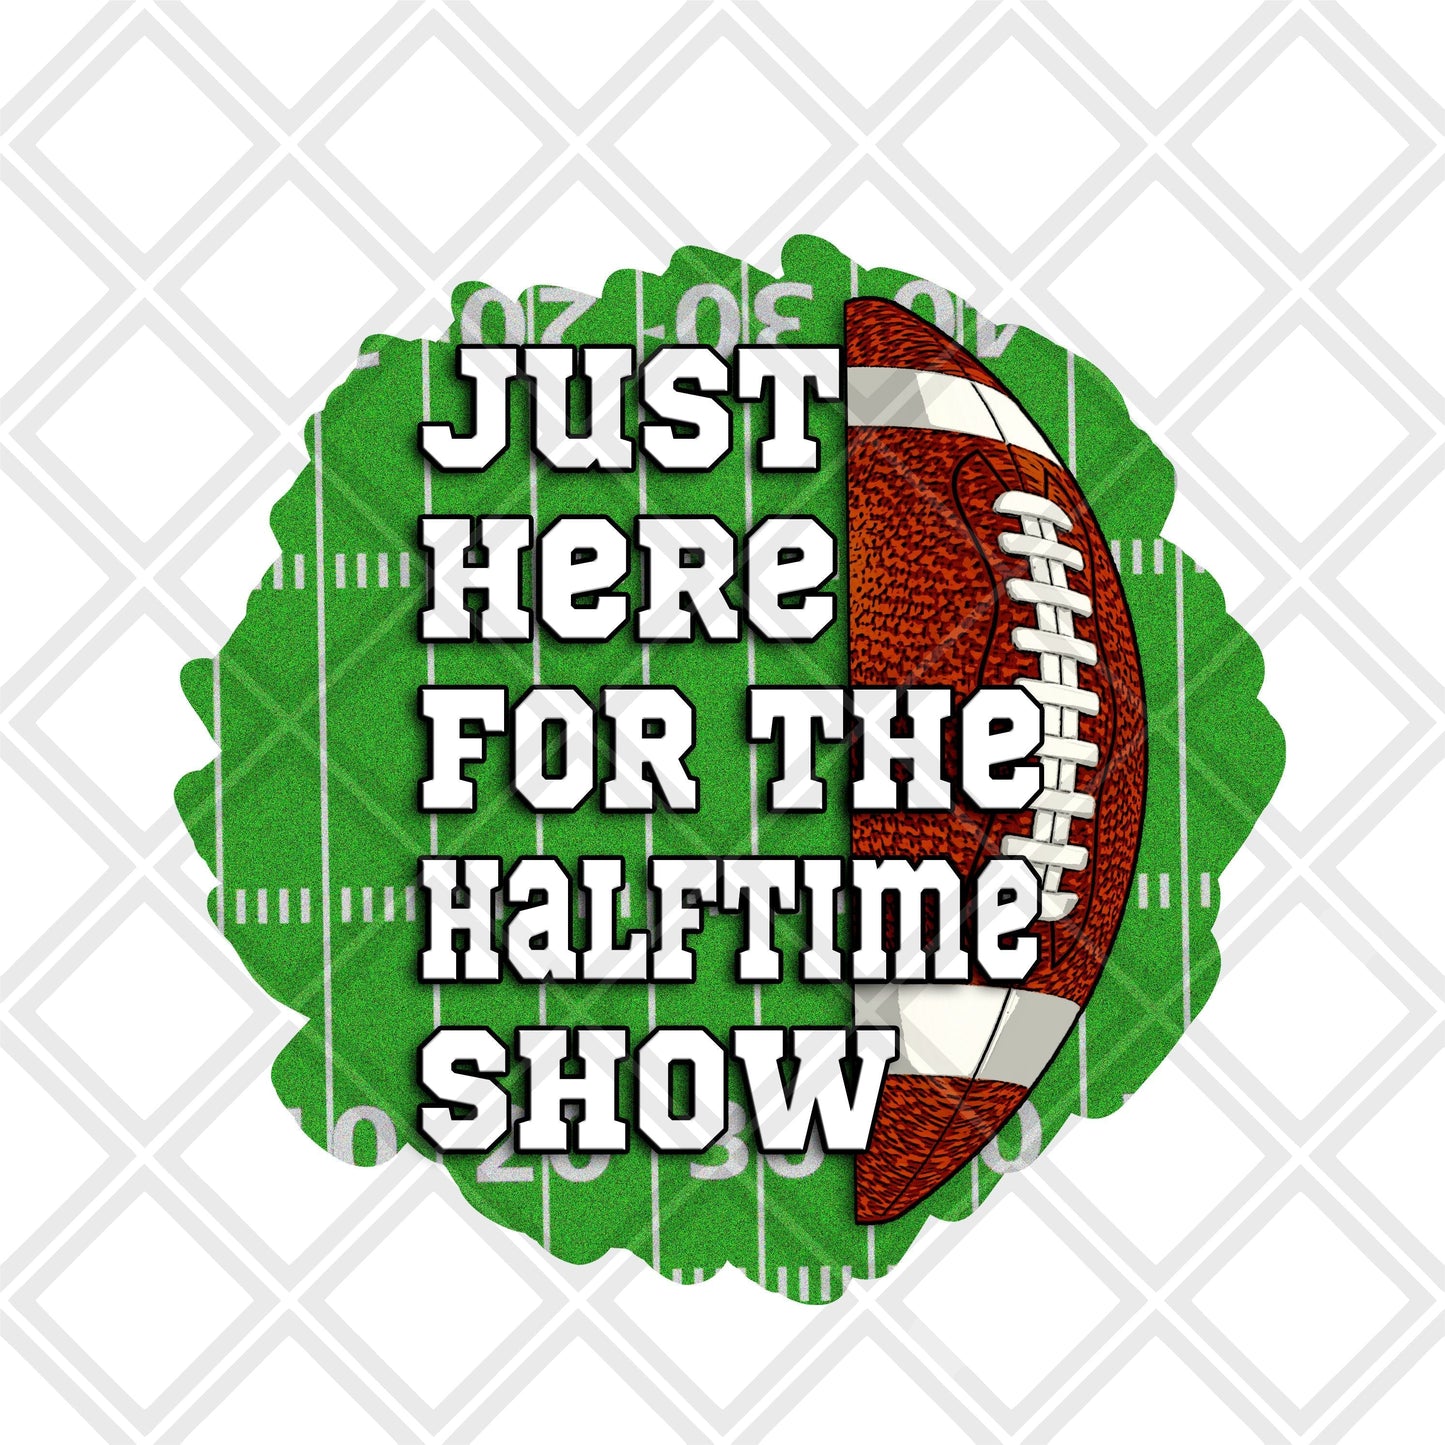 Just here for the Halftime show football DTF TRANSFERPRINT TO ORDER